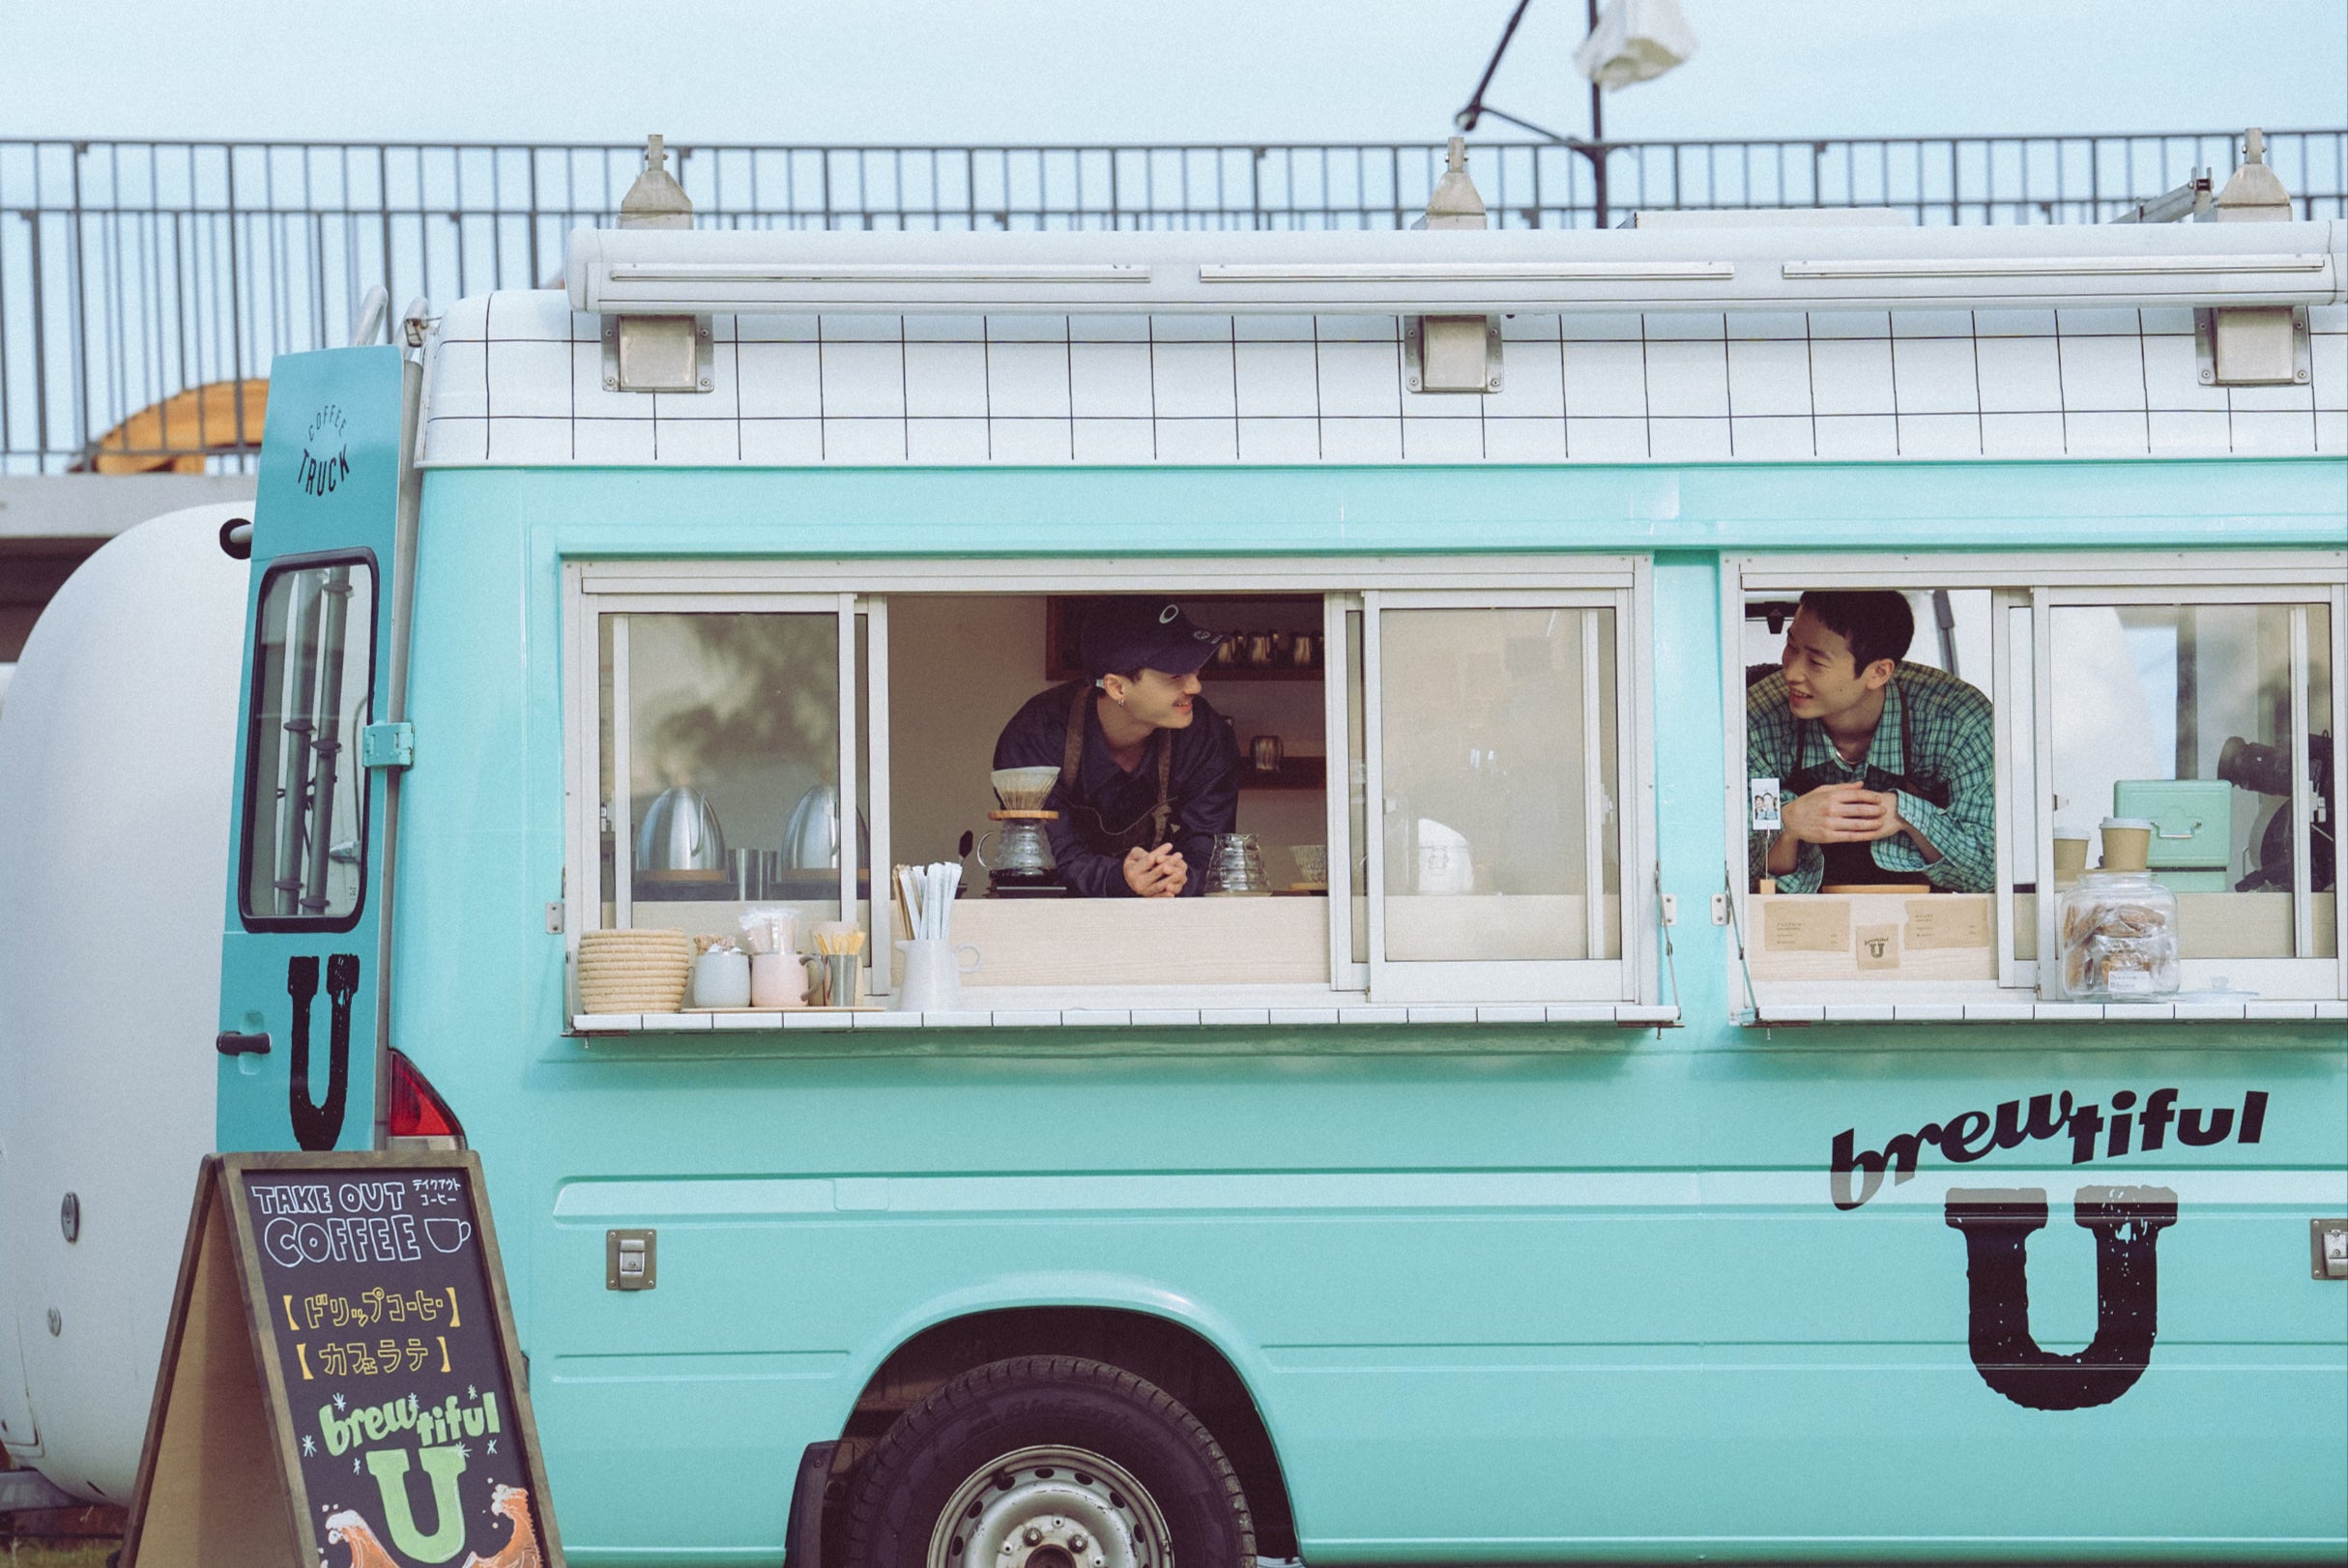 The contestants live together while working in a coffee van